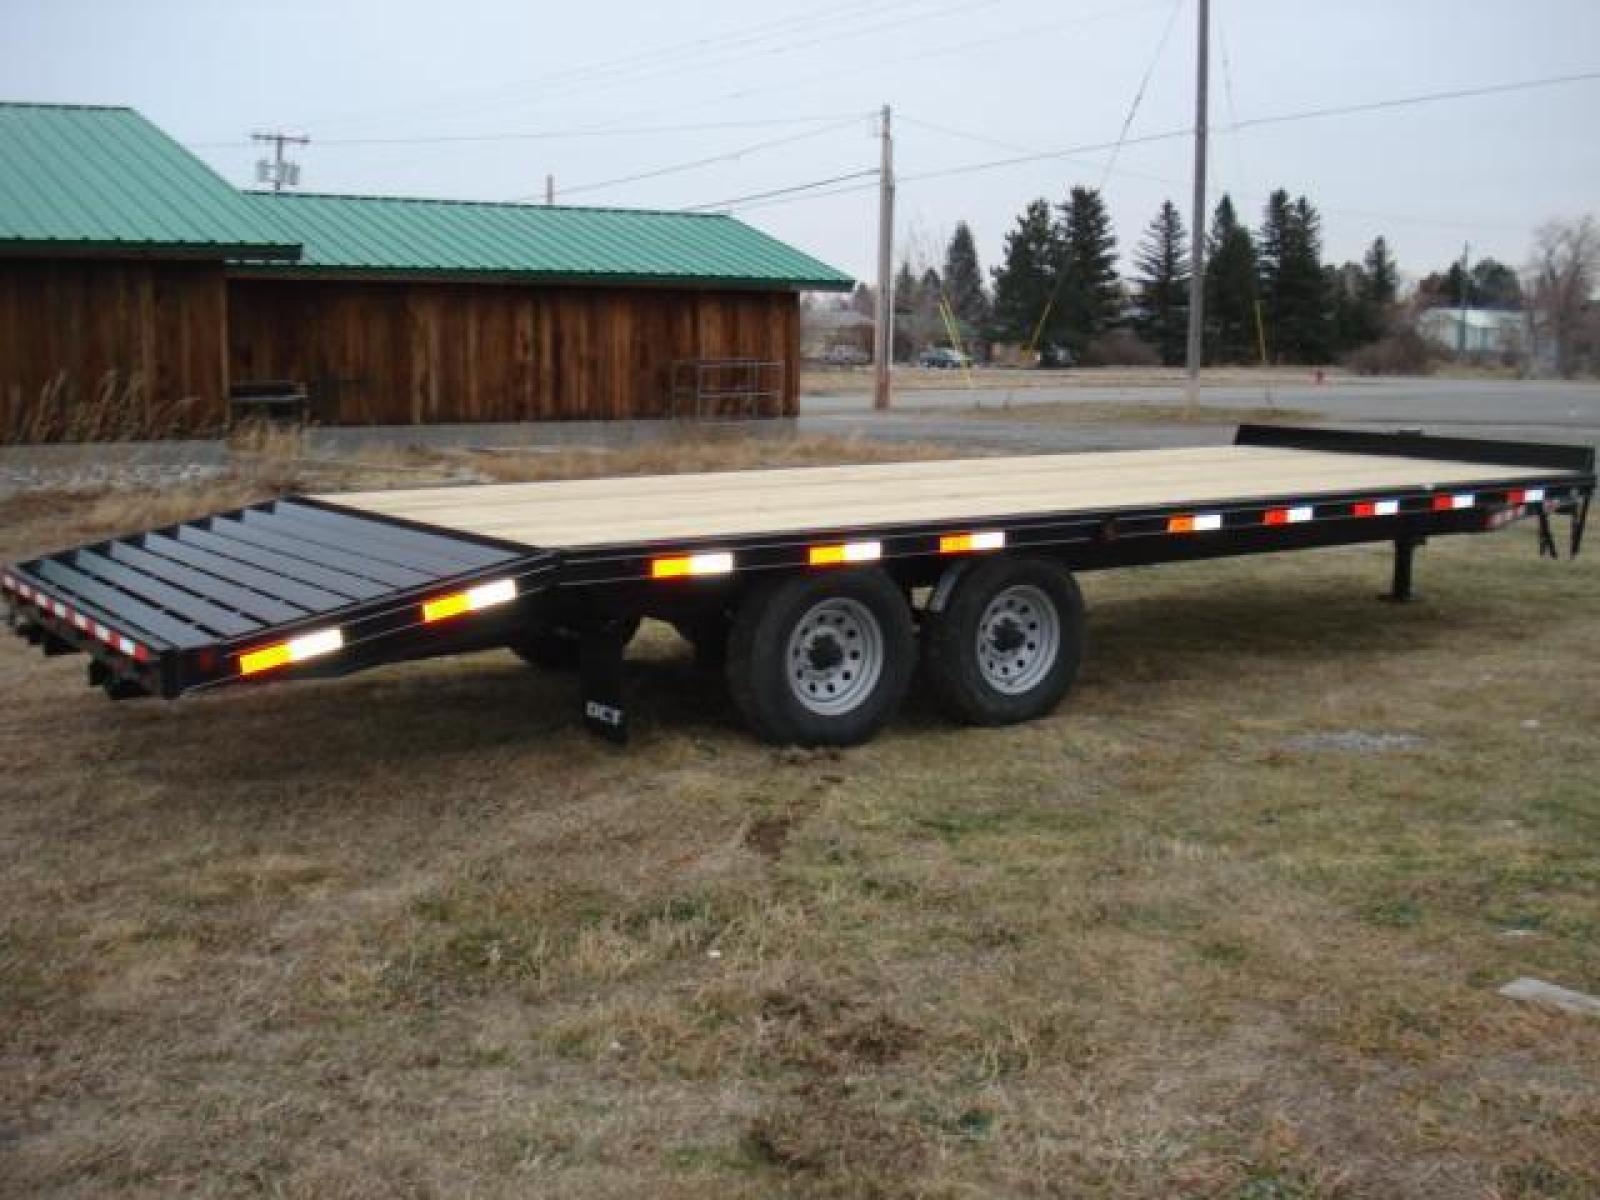 2022 Black DCT 81/2 x 20 + 4 Deckover Equip , located at 310 West 1st Ave, Big Timber, MT, 59011, (406) 860-8510, 45.833511, -109.957809 - DCT 81/2 X 20 + 4 DECKOVER BUMPER-PULL EQUIPMENT TRAILER, 4' DOVETAIL, 14K GVW, 2 - 7K AXLES W- EZ LUBE HUBS, HD SLIPPER SPRING SUSPENSION, 16"-10 PLY TIRES, 16" ON CENTER CROSS MEMBERS, LED LIGHTS, TREATED DECK, REAR RAMPS, 2-5-16 ADJUSTABLE COUPLER, 12K DROP FOOT JACK, STAKE POCKETS-RUB RAIL. T - Photo #1